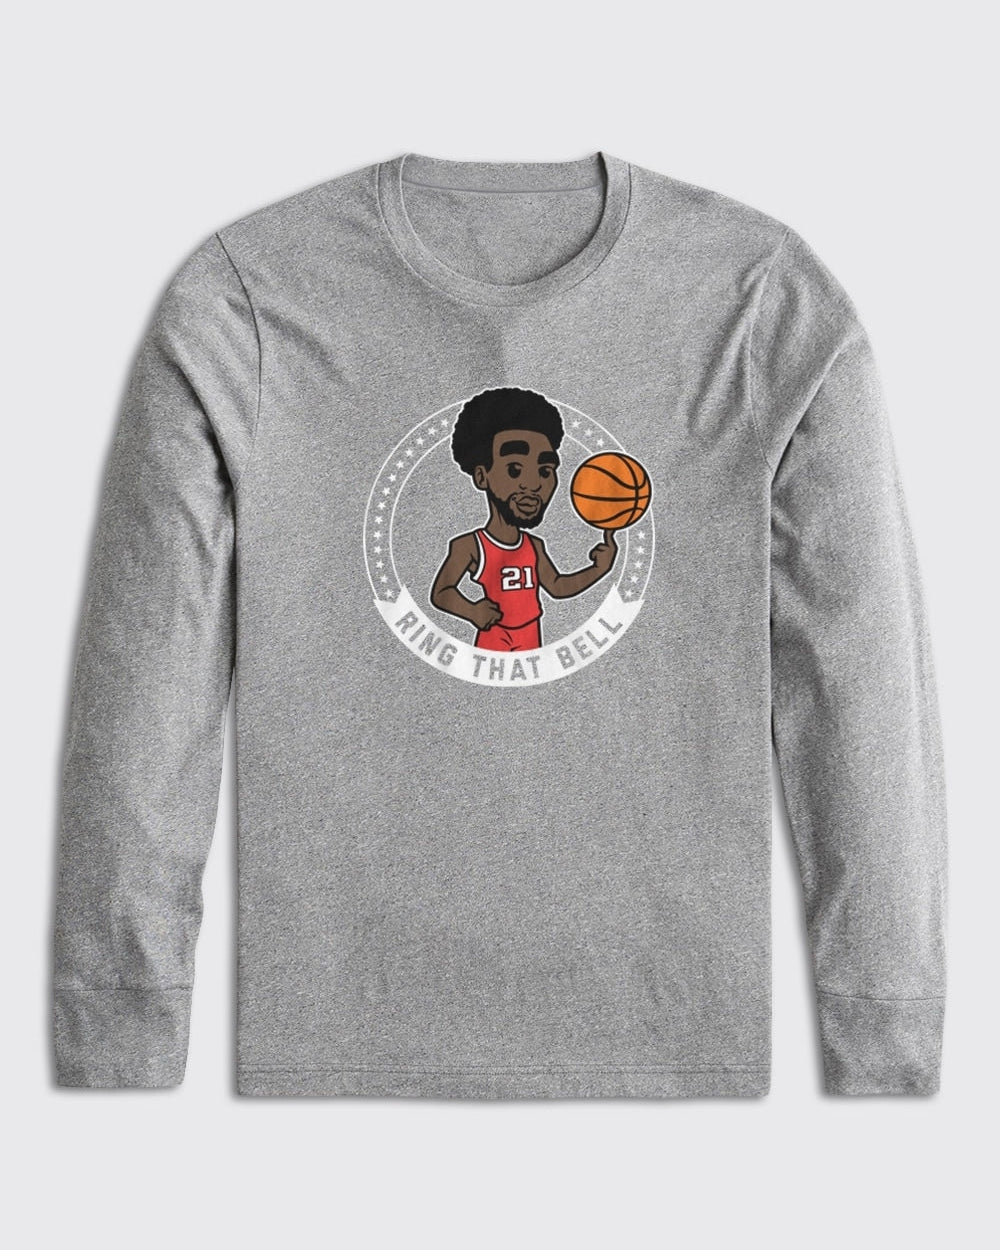 Embiid Ring That Bell Long Sleeve-Philly Sports Shirts